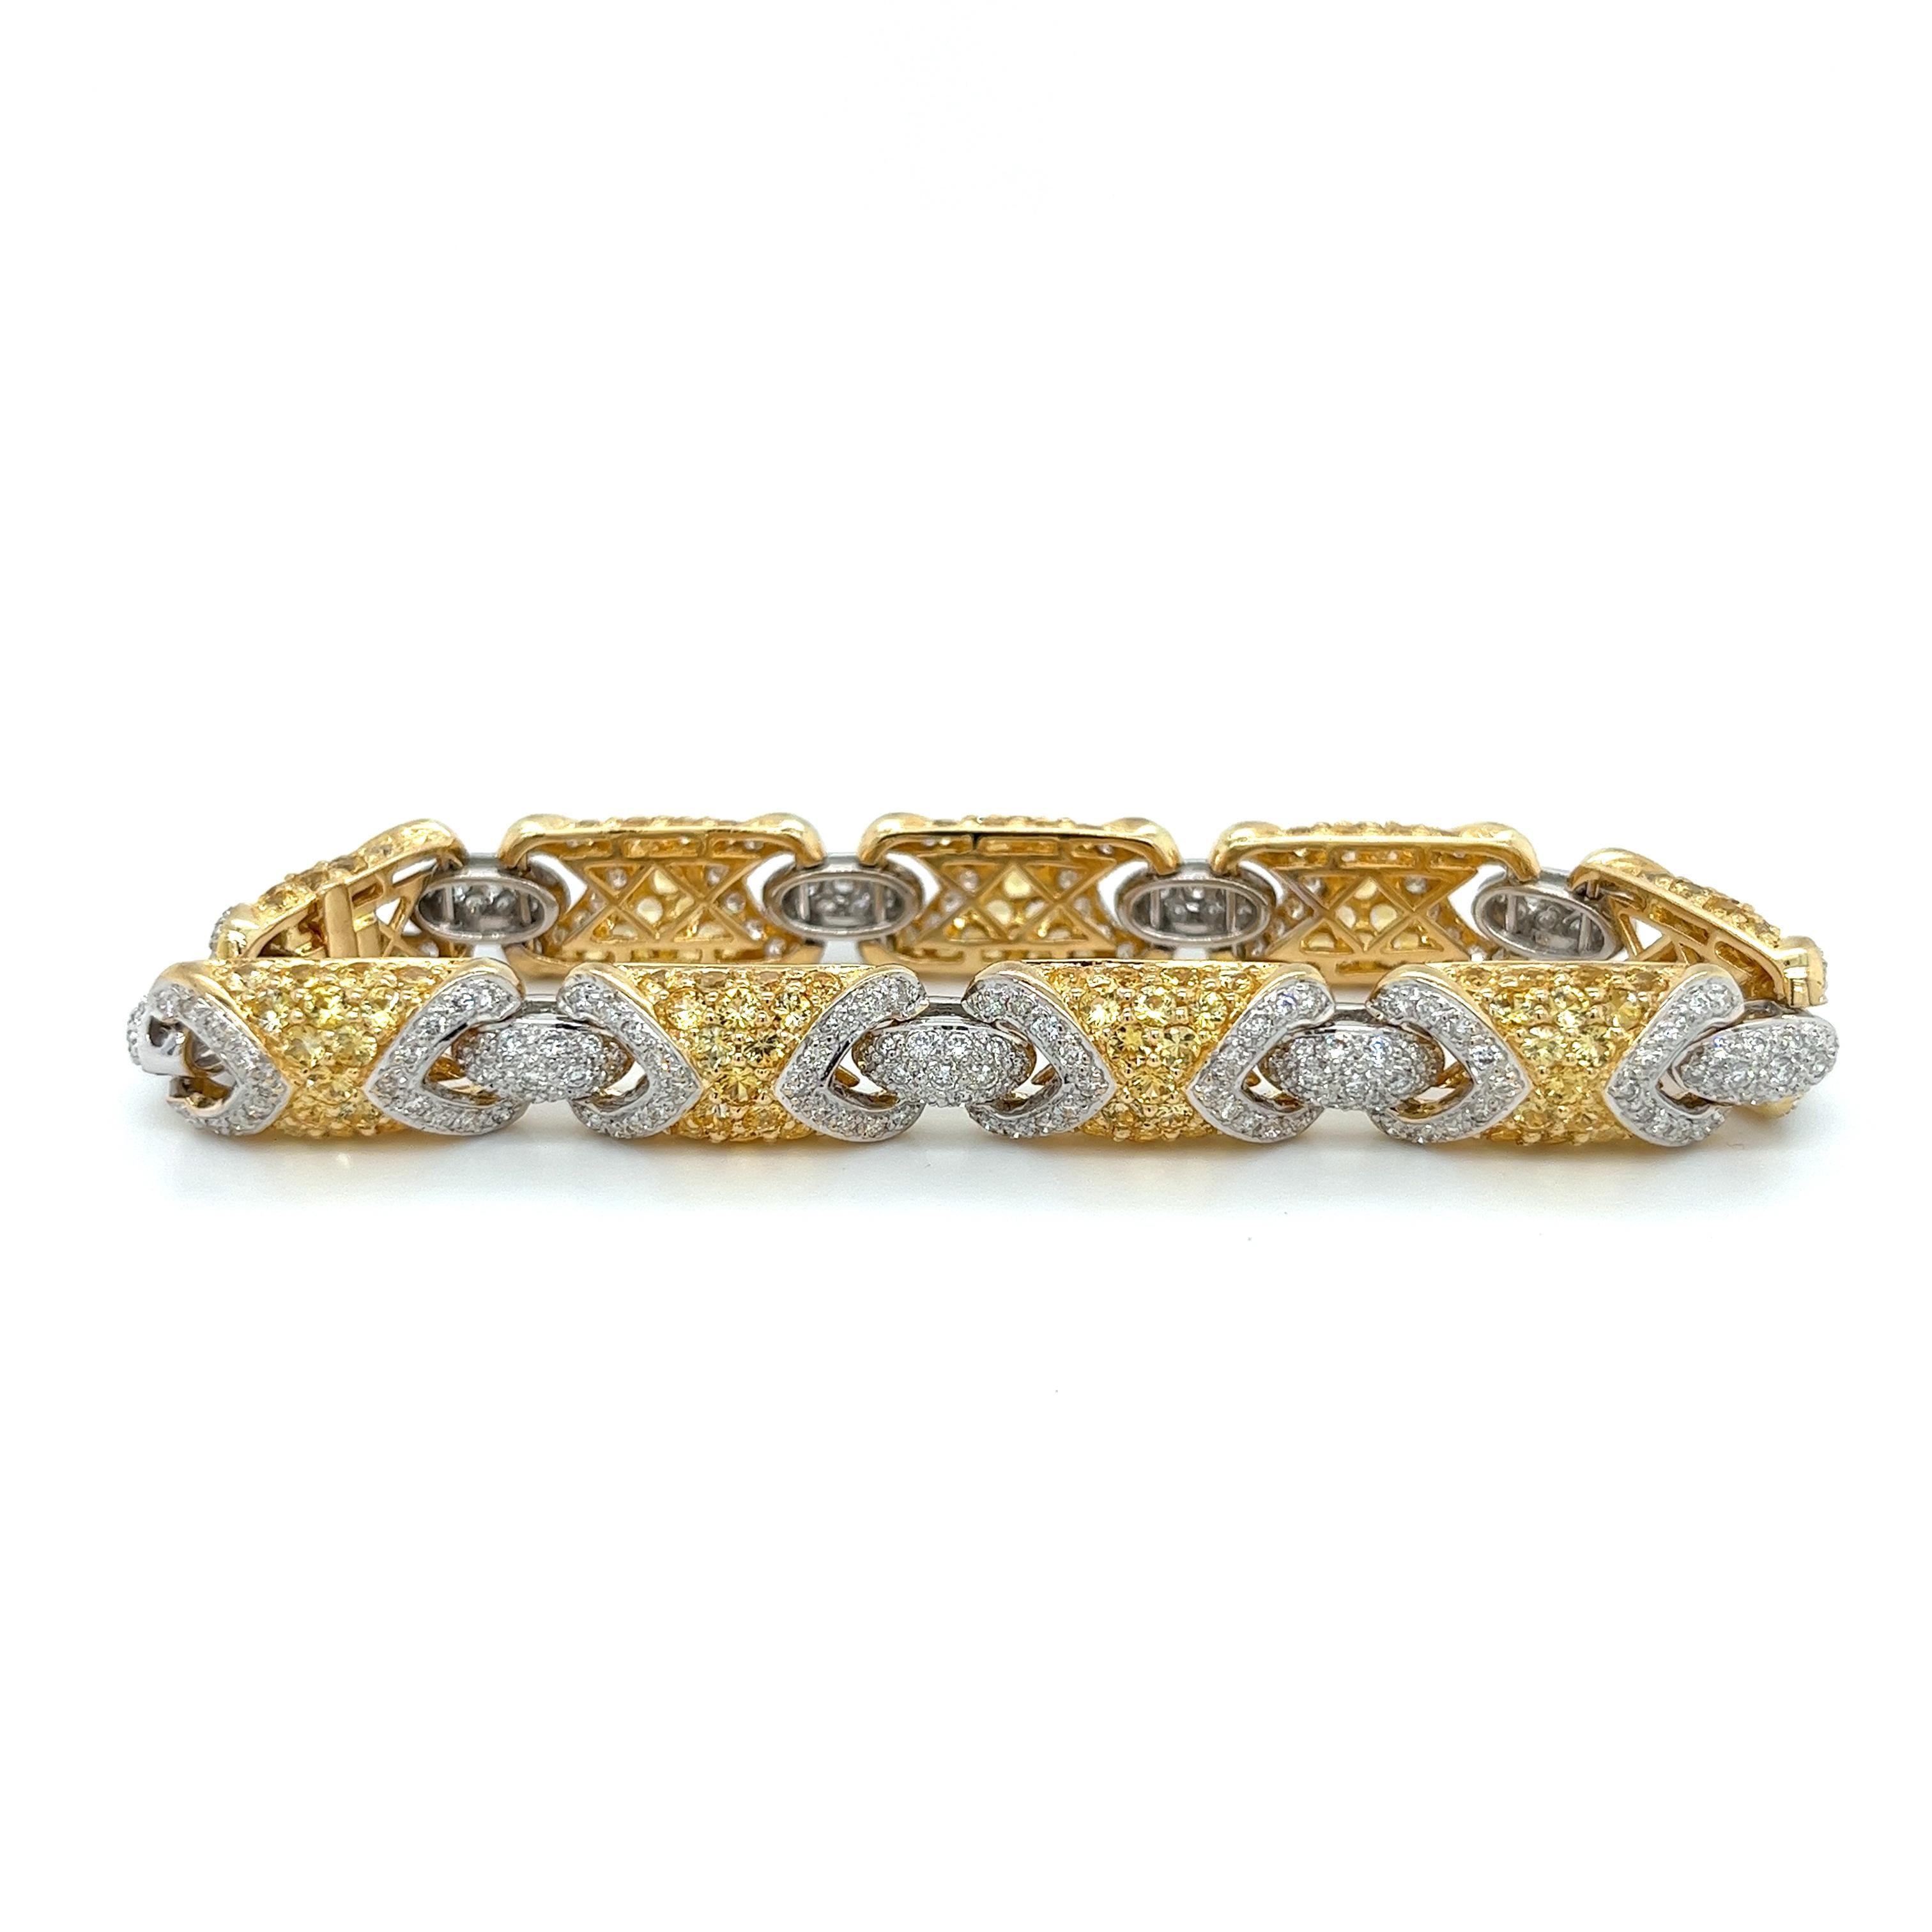 Stunning two-tone Yellow Sapphire and Diamond bracelet, masterfully crafted in a mix of 18k yellow and white gold. This exquisite piece features radiant, all-natural yellow sapphires that create an eye-catching pattern, complemented by exceptional,